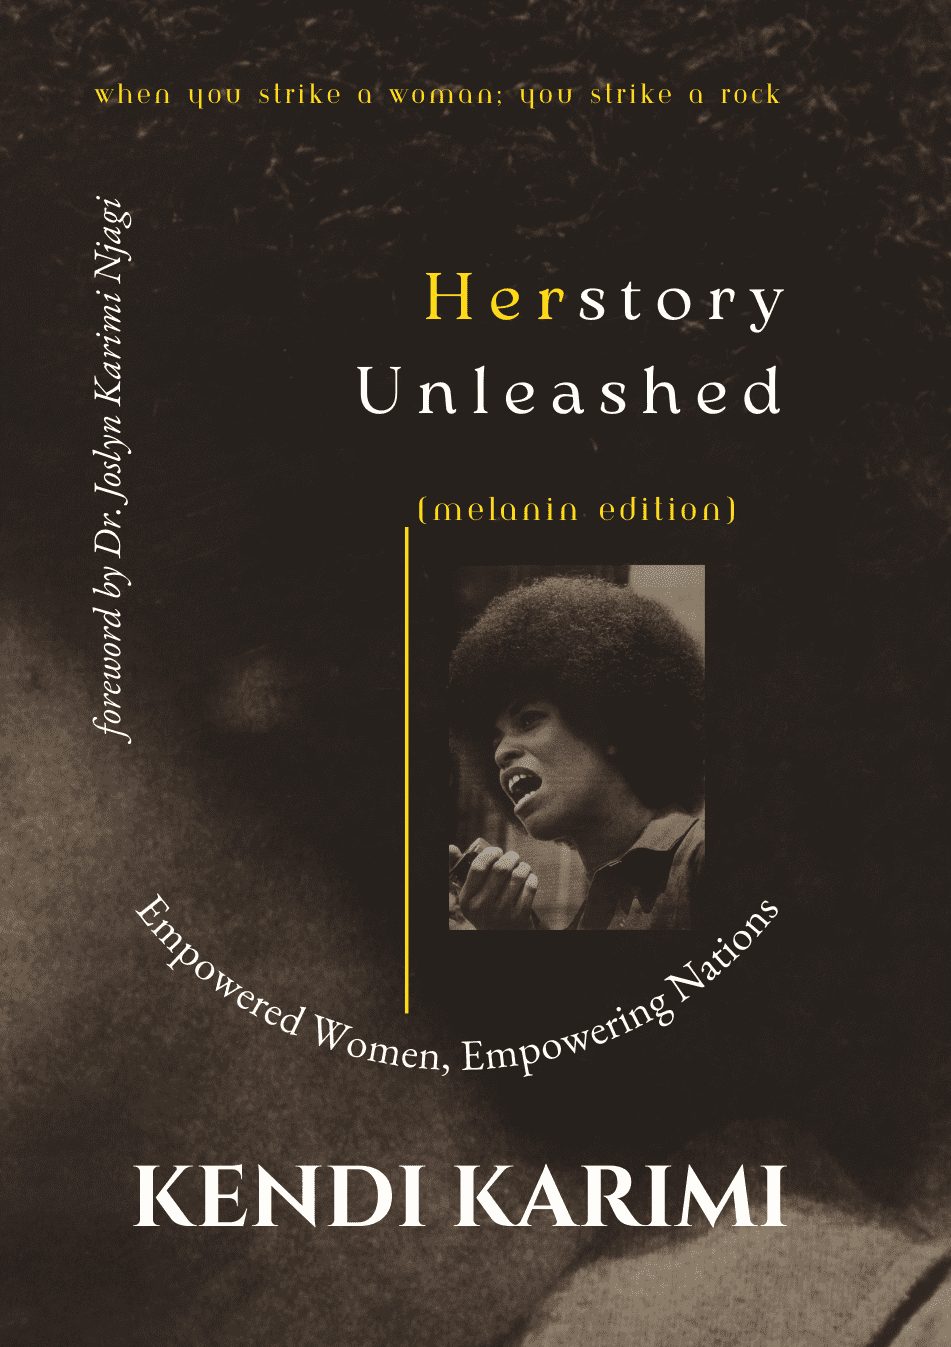 Herstory Unleashed (Empowered Women Empowering Nations) - Kendi Karimi - 1st edition